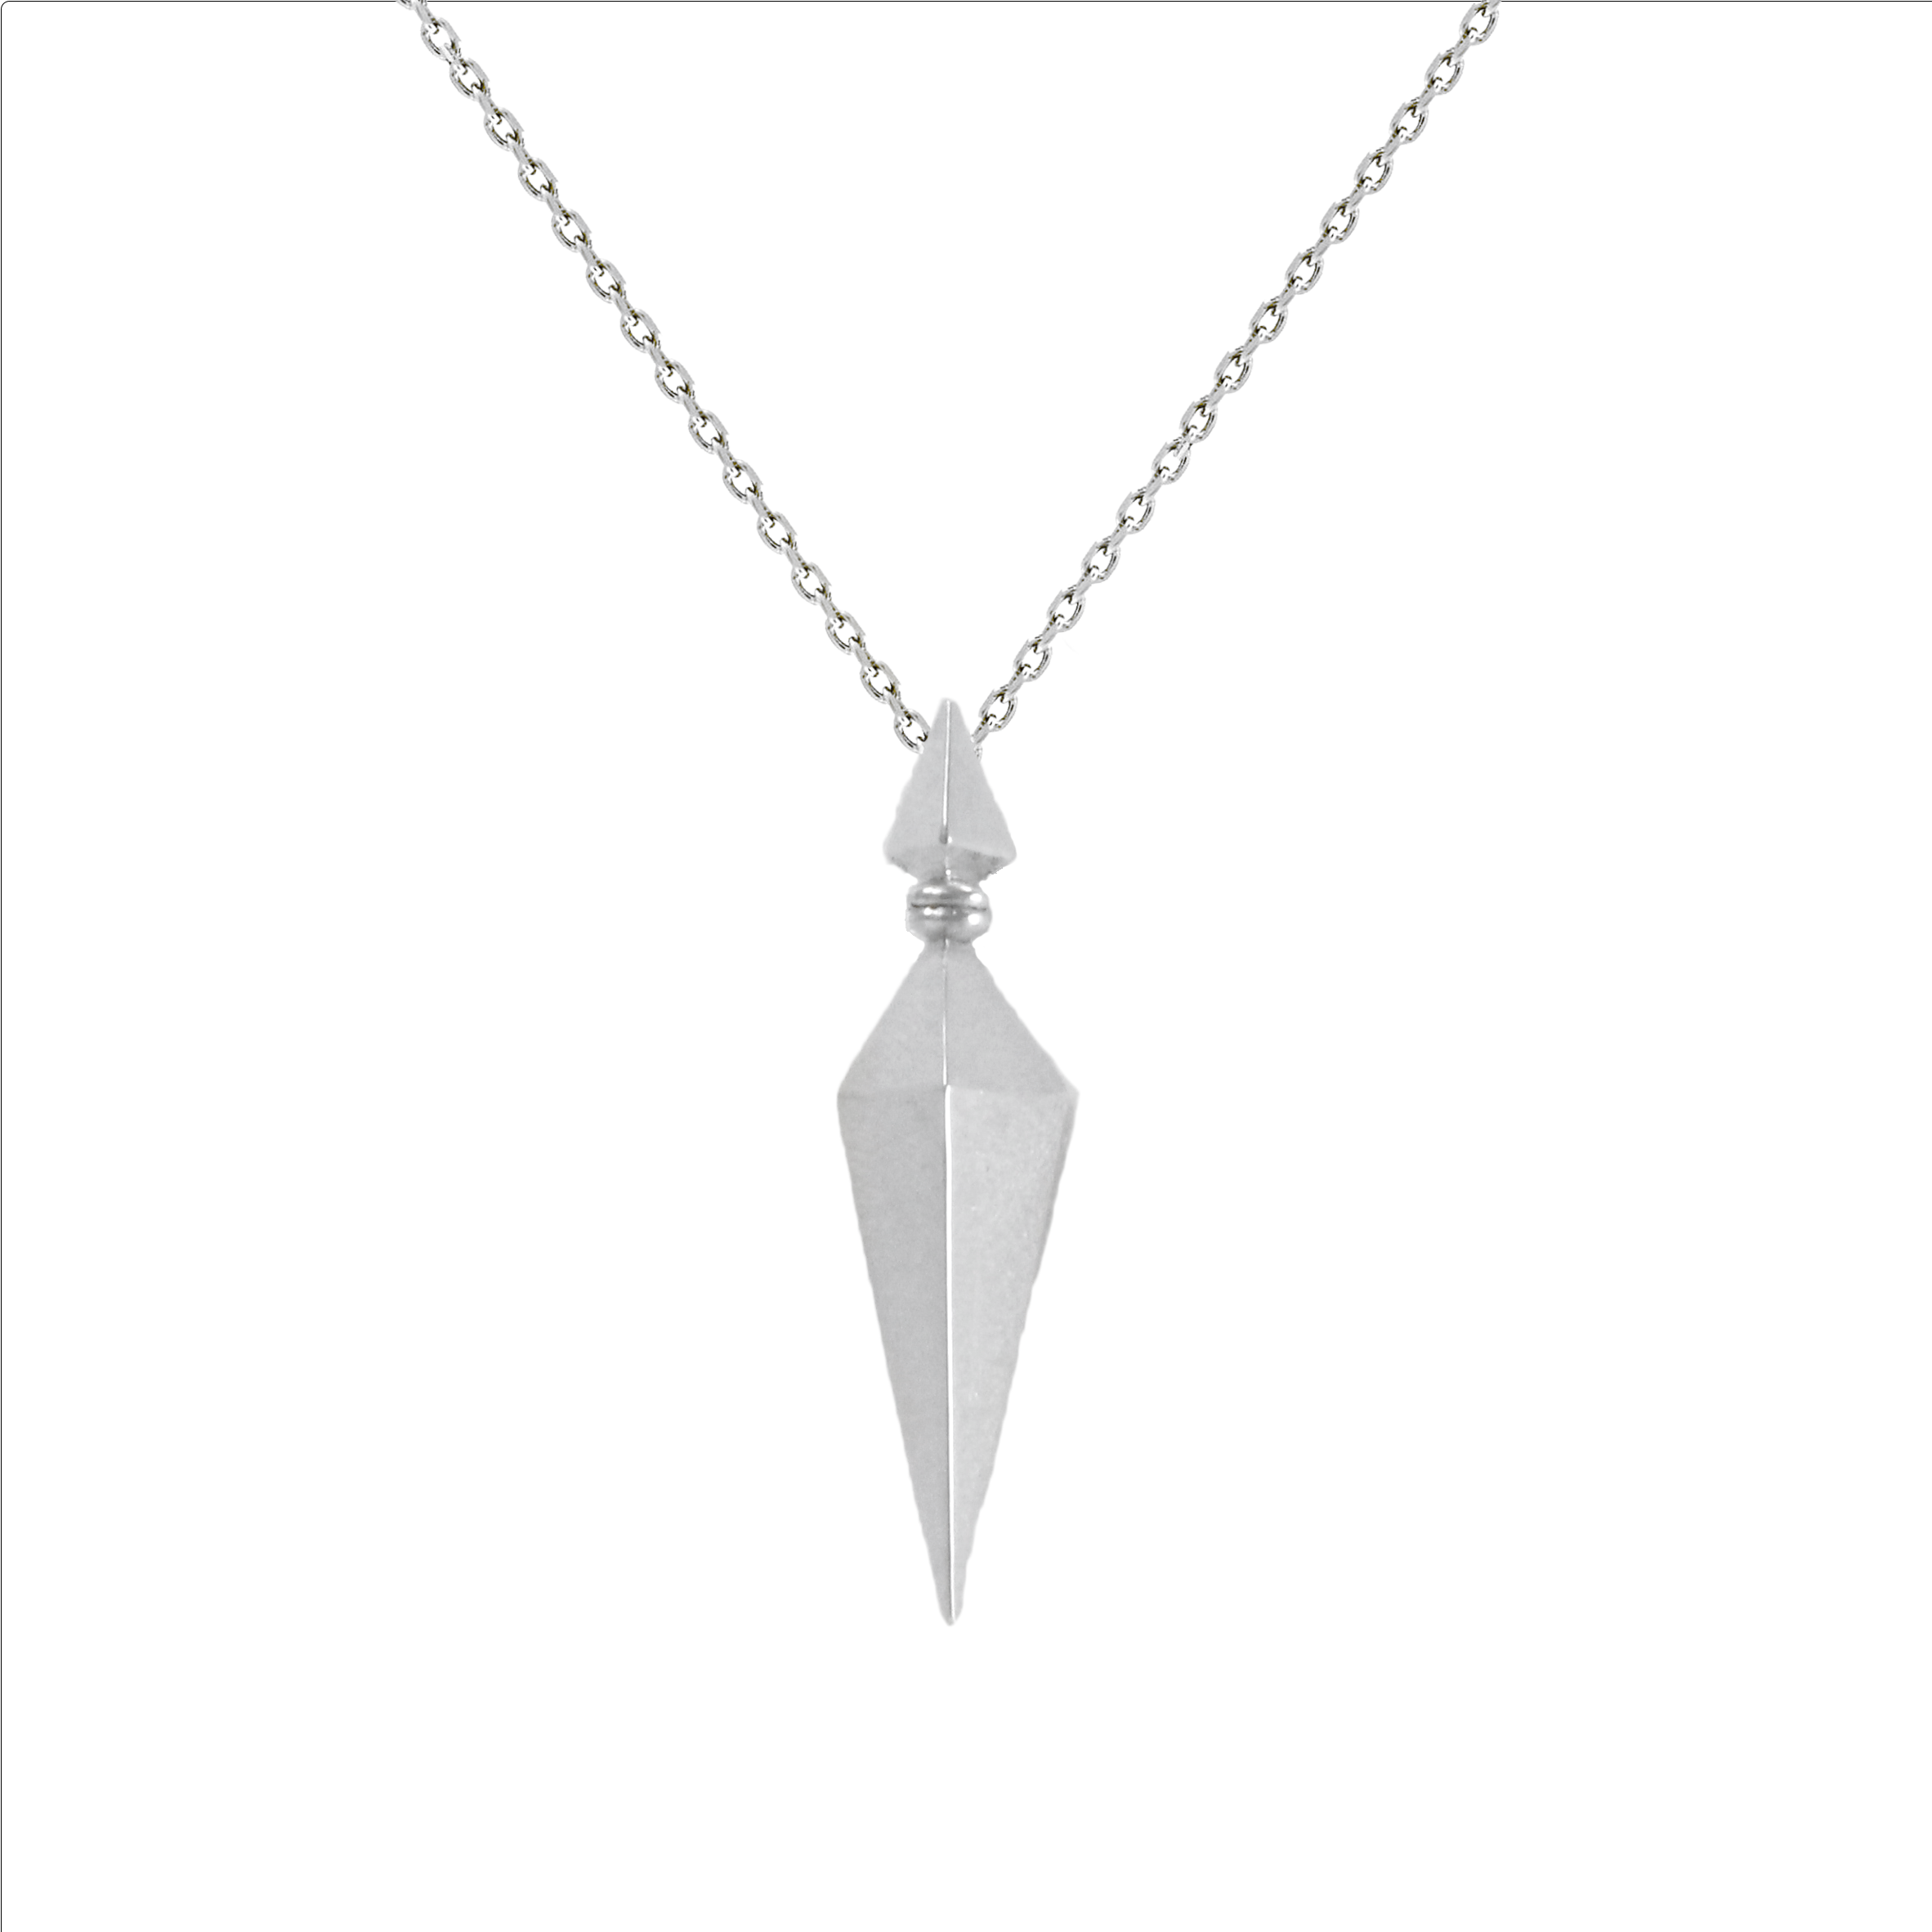 Silver Pyramid Spike Pendant on Silver Chain